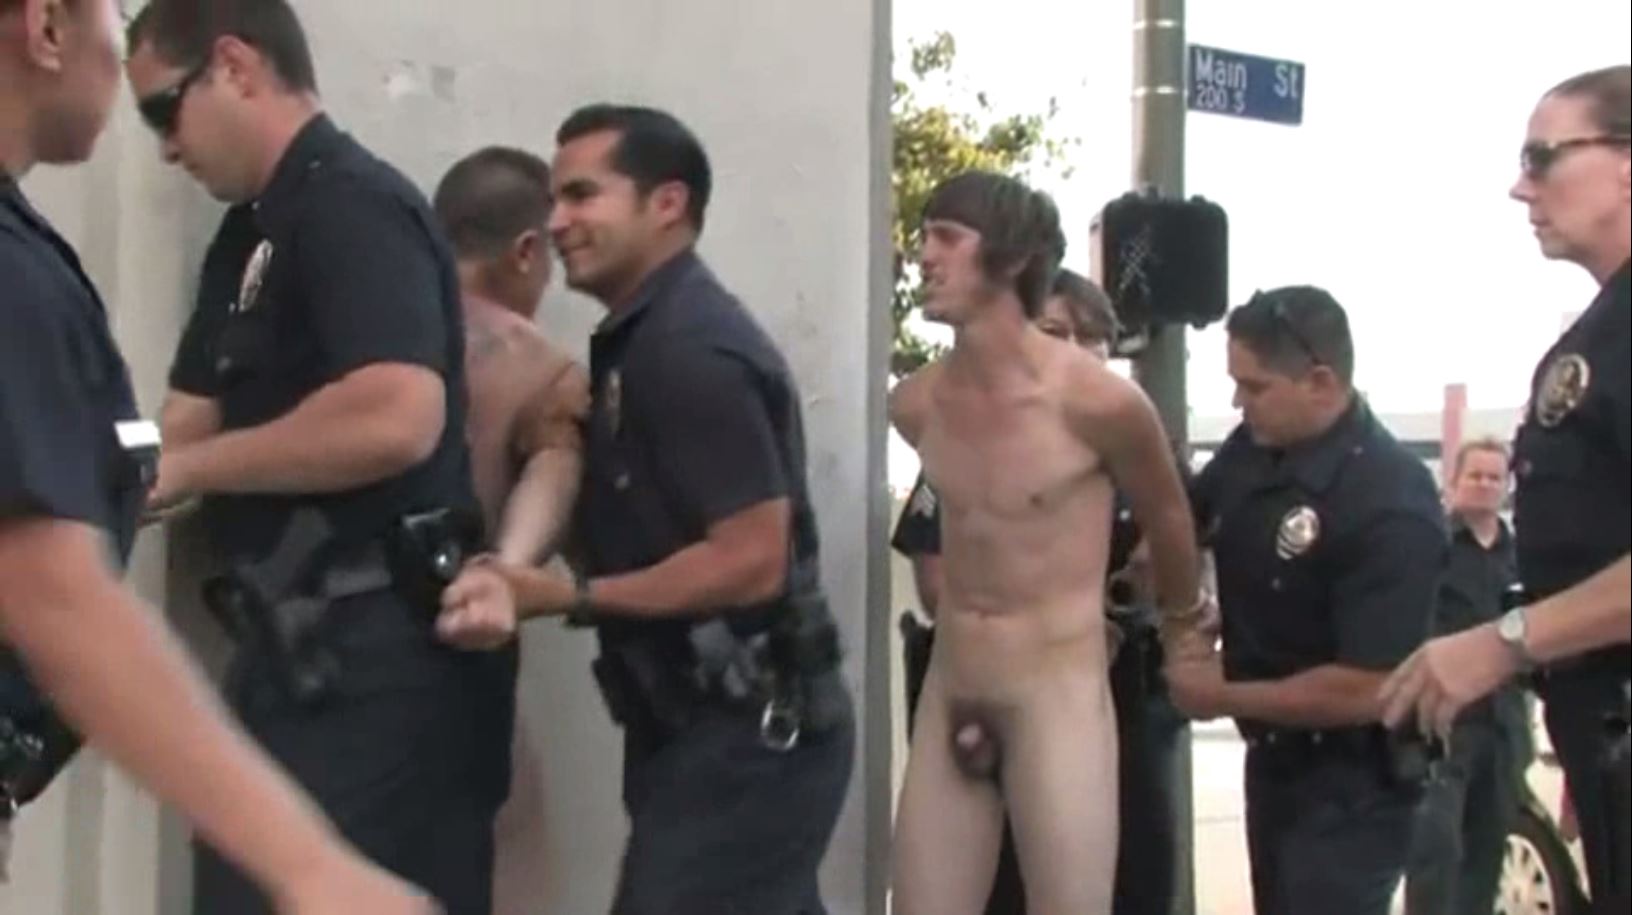 Naked Occupy Protesters Getting Arrested